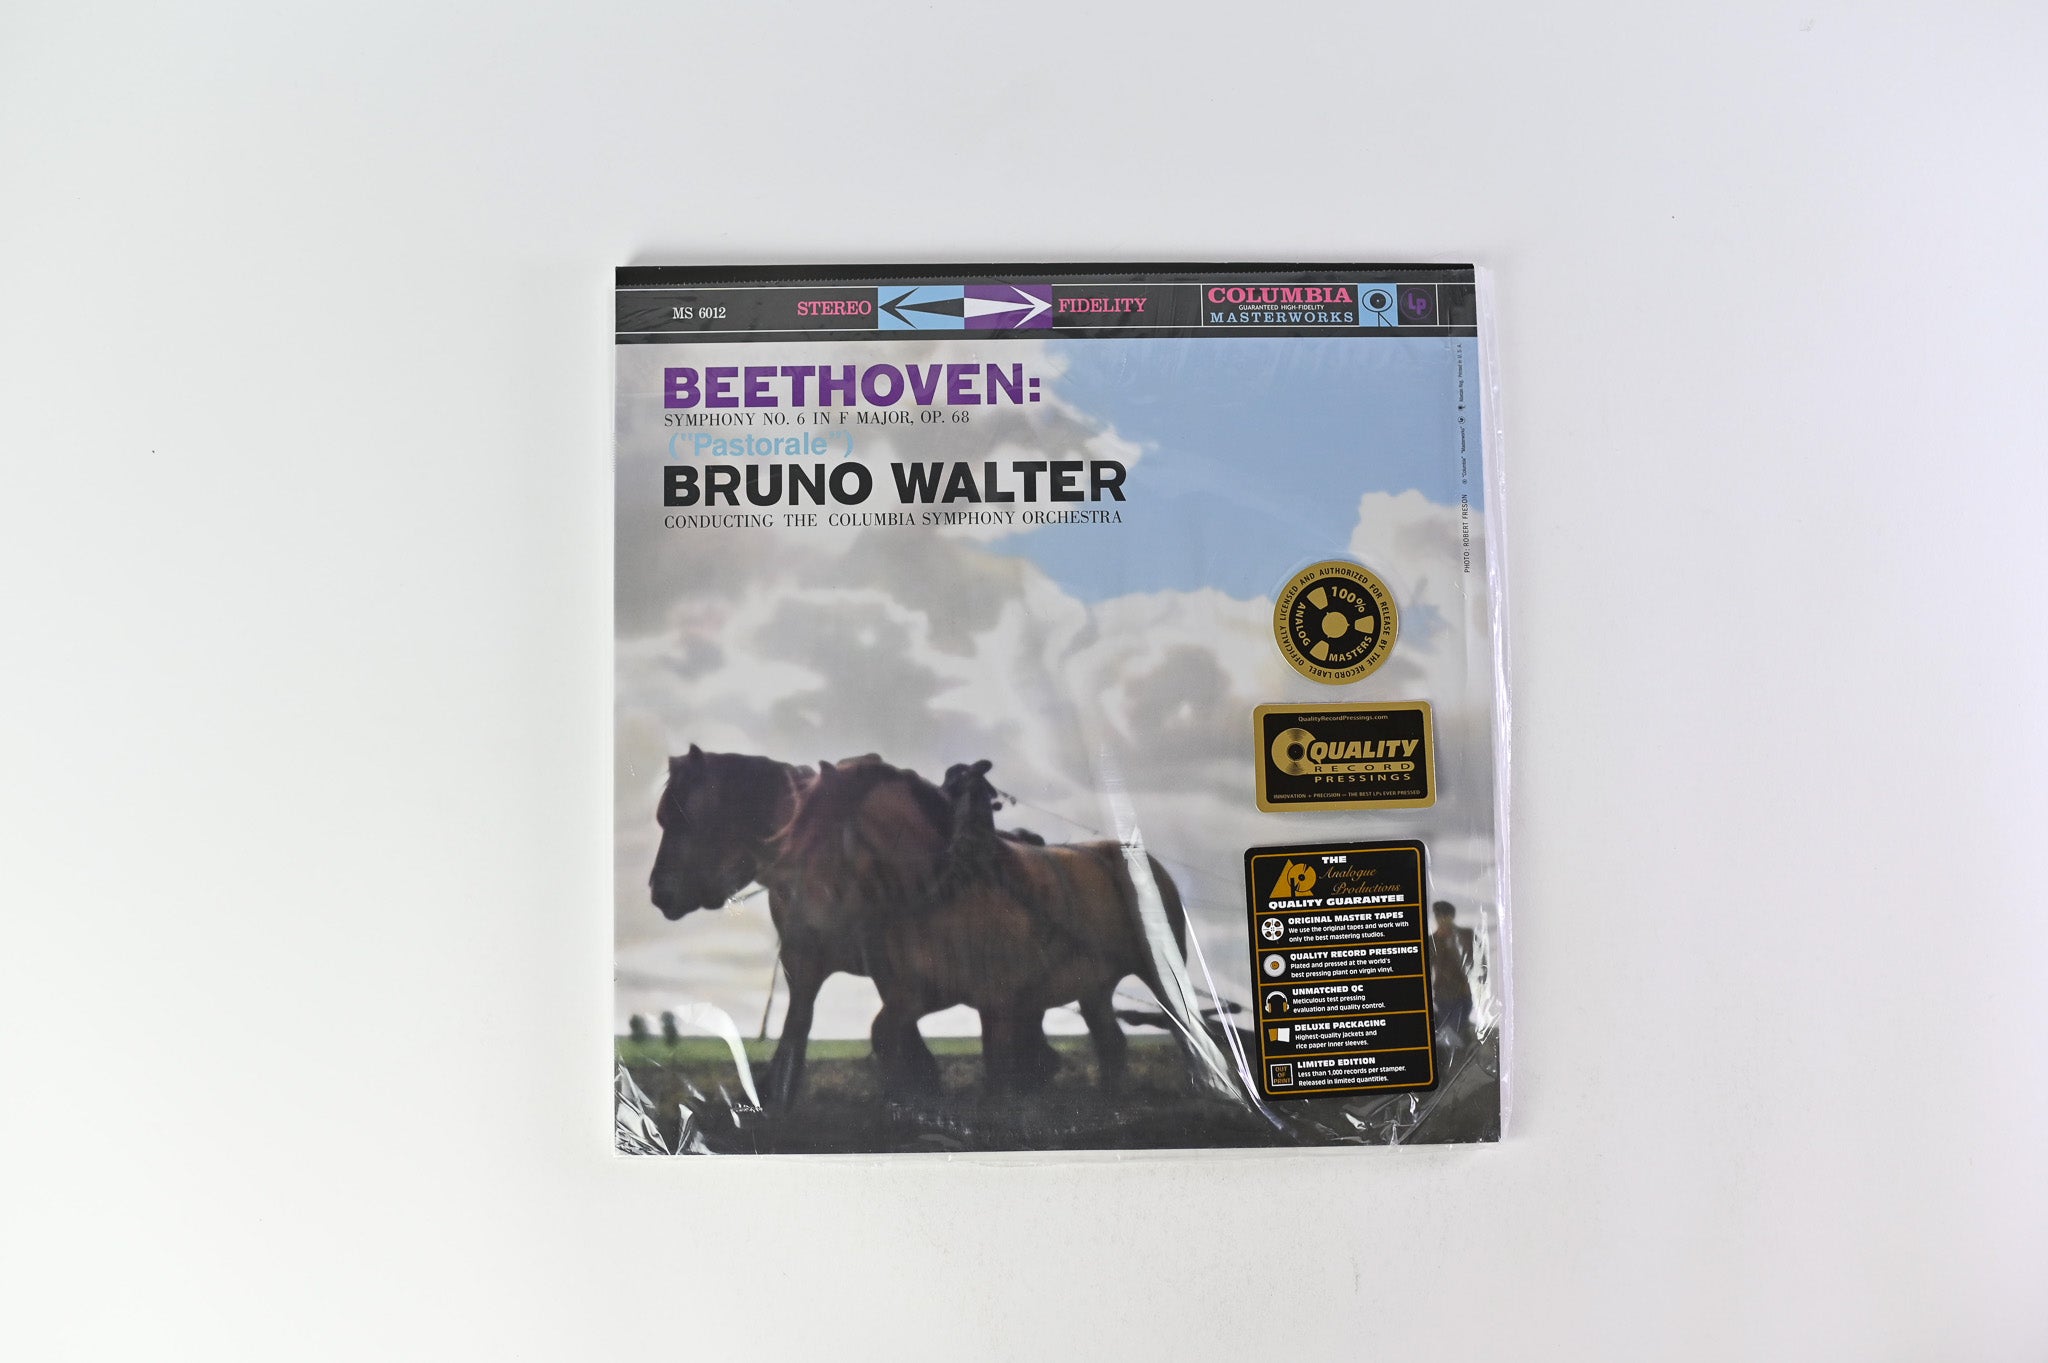 Bruno Walter - Beethoven: Symphony No. 6 in F Major, Op. 68  (Columbia Symphony Orchestra) on Analogue Productions